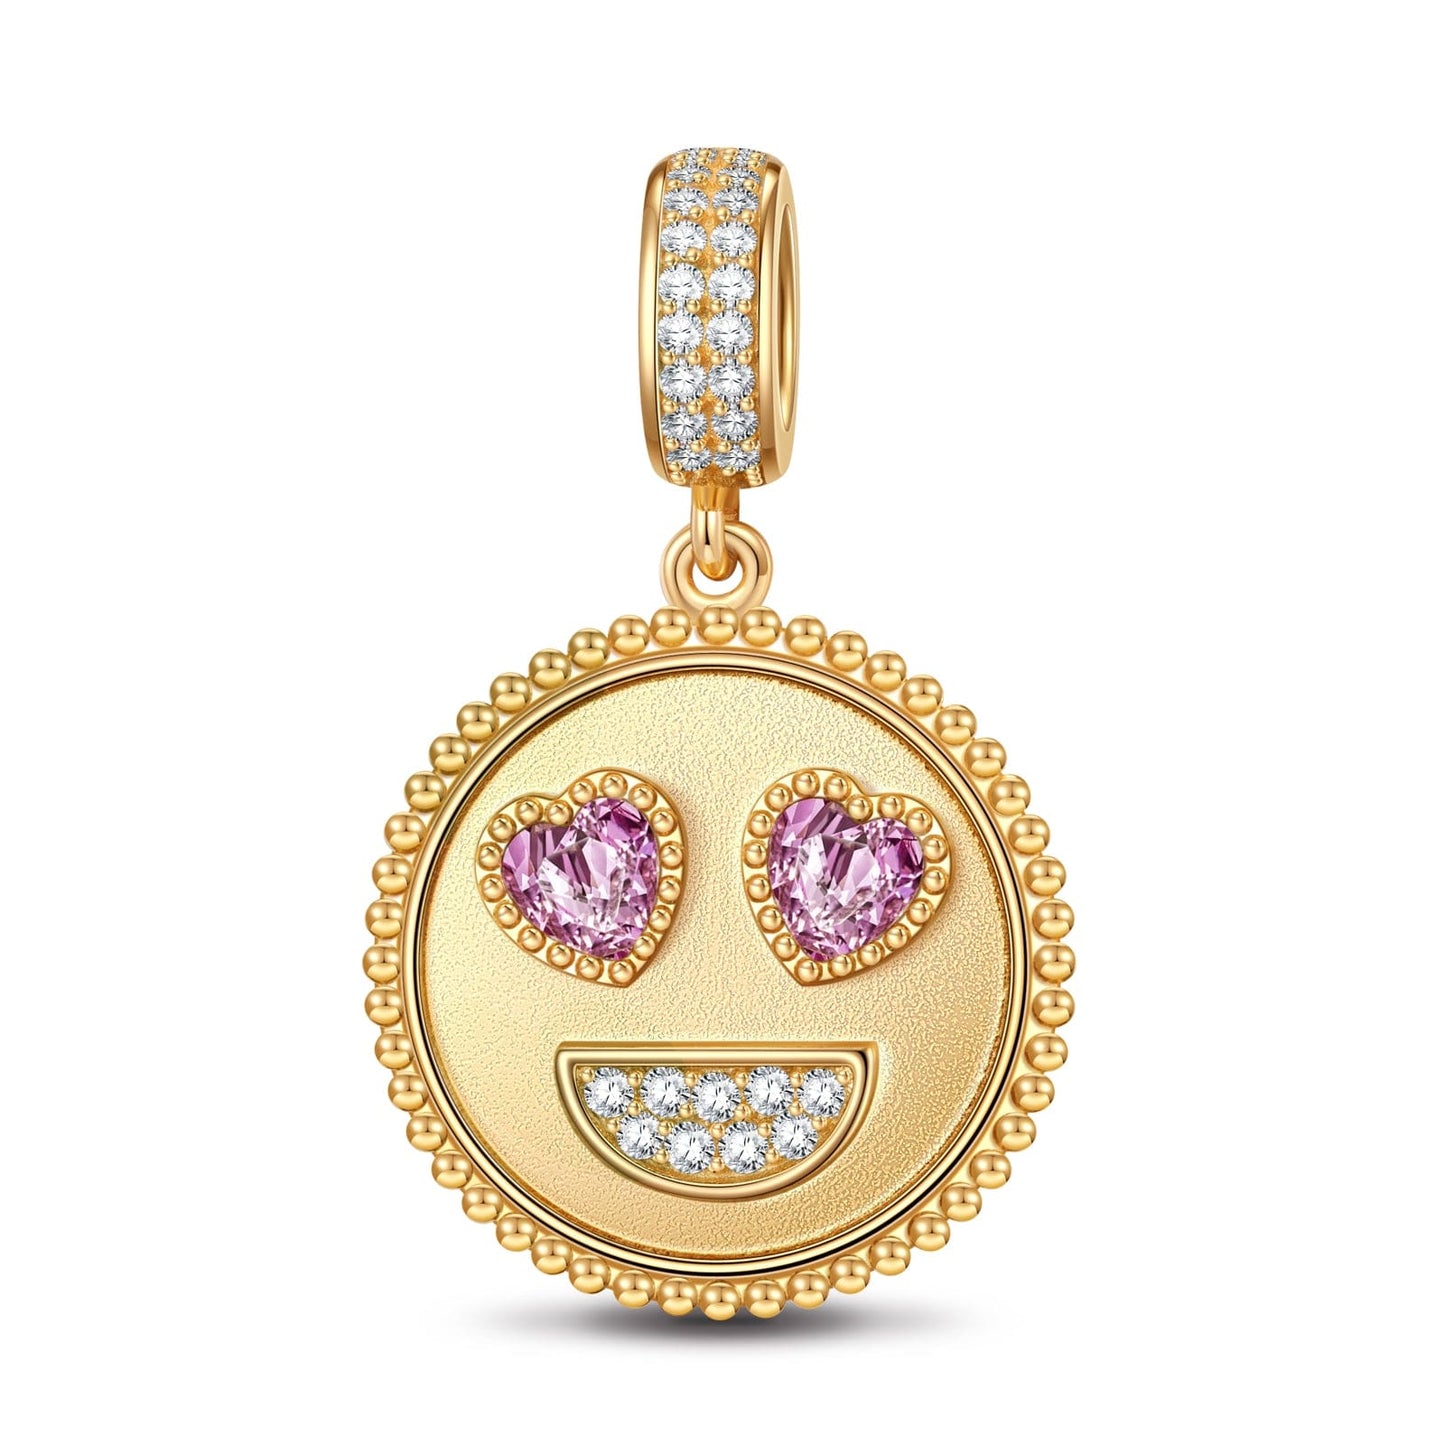 Smiling Face with Heart-Eyes Emoji Tarnish-resistant Silver Charms In 14K Gold Plated